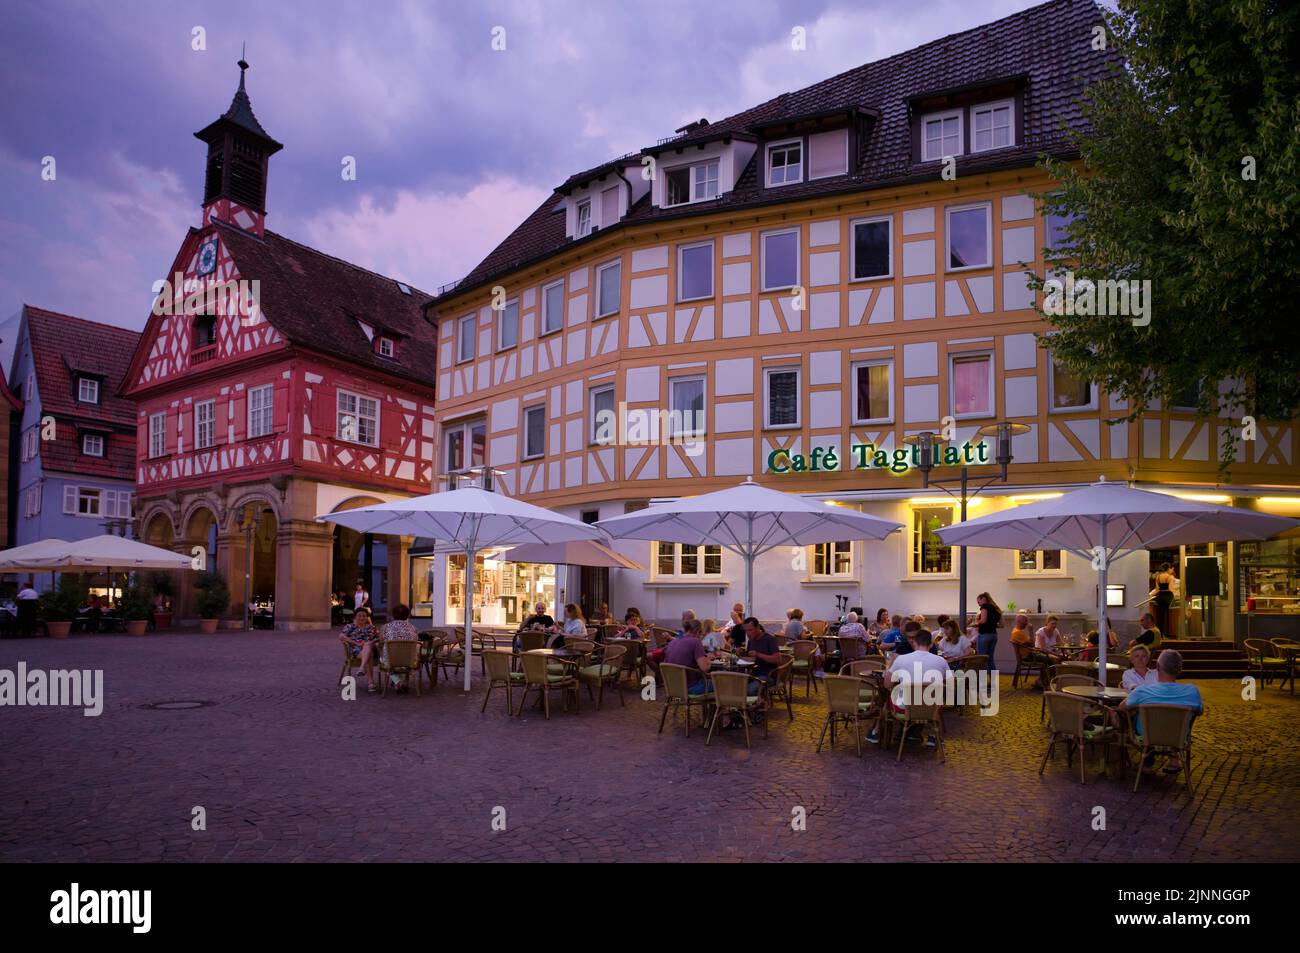 Restaurants in front of historic town hall, market place, evening mood, Waiblingen, Baden-Wuerttemberg, Germany Stock Photo